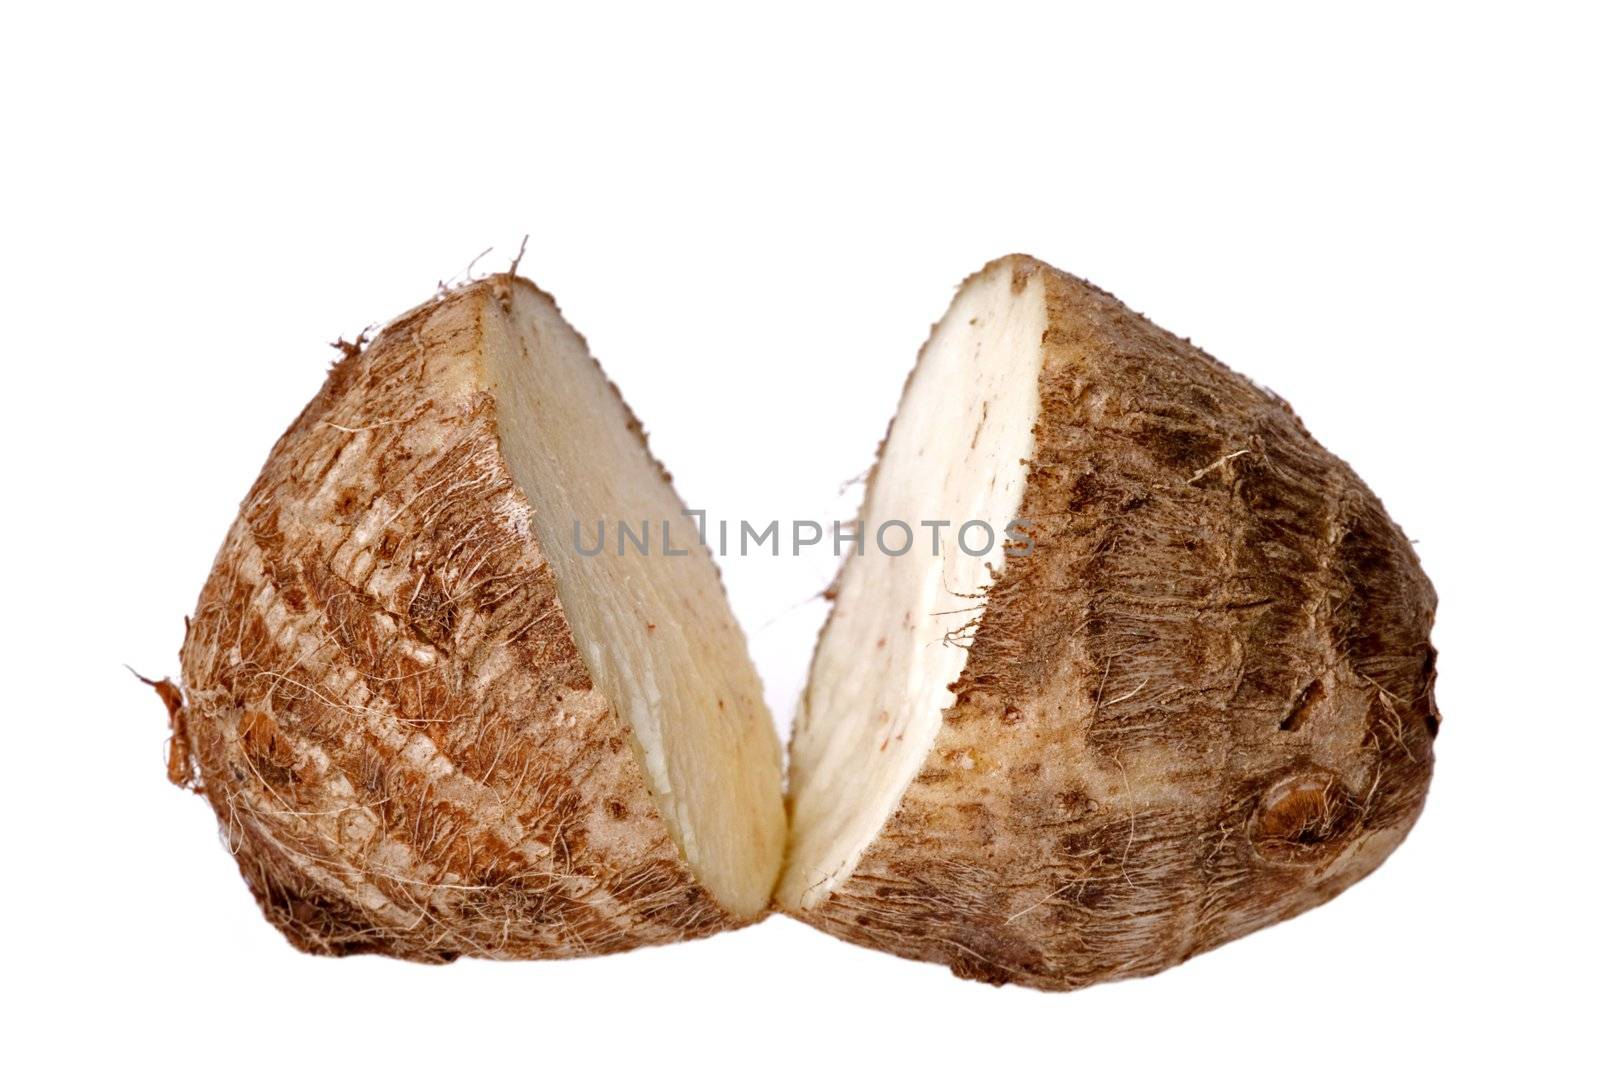 Isolated macro image of a small yam.